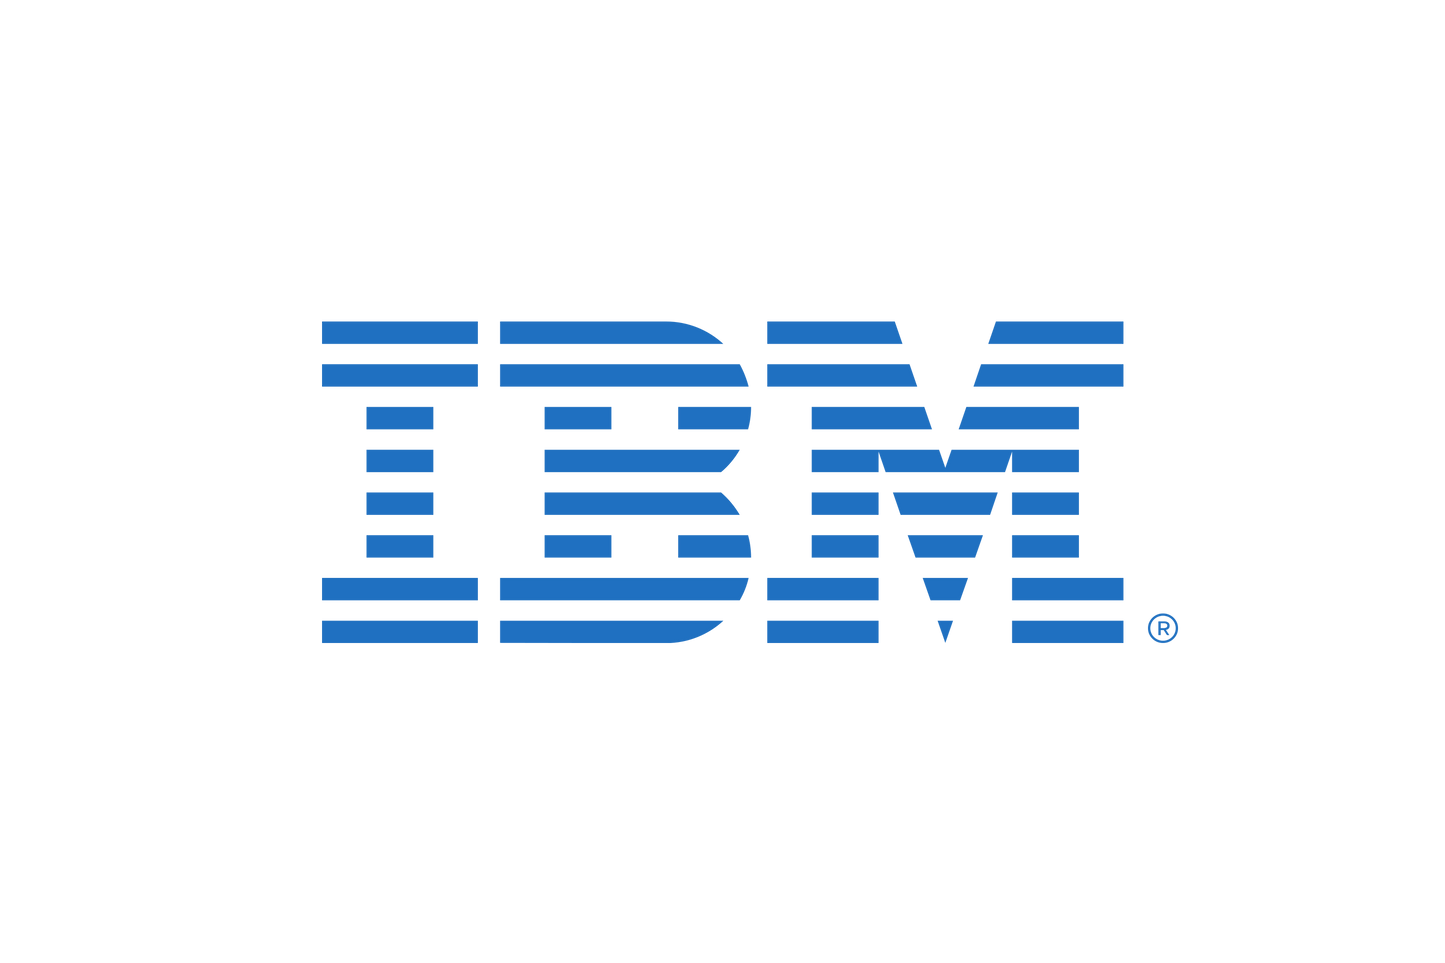 IBM Db2 Warehouse Cartridge for IBM Cloud Pak for Data Reserved for IBM Z Virtual Processor Core Monthly License